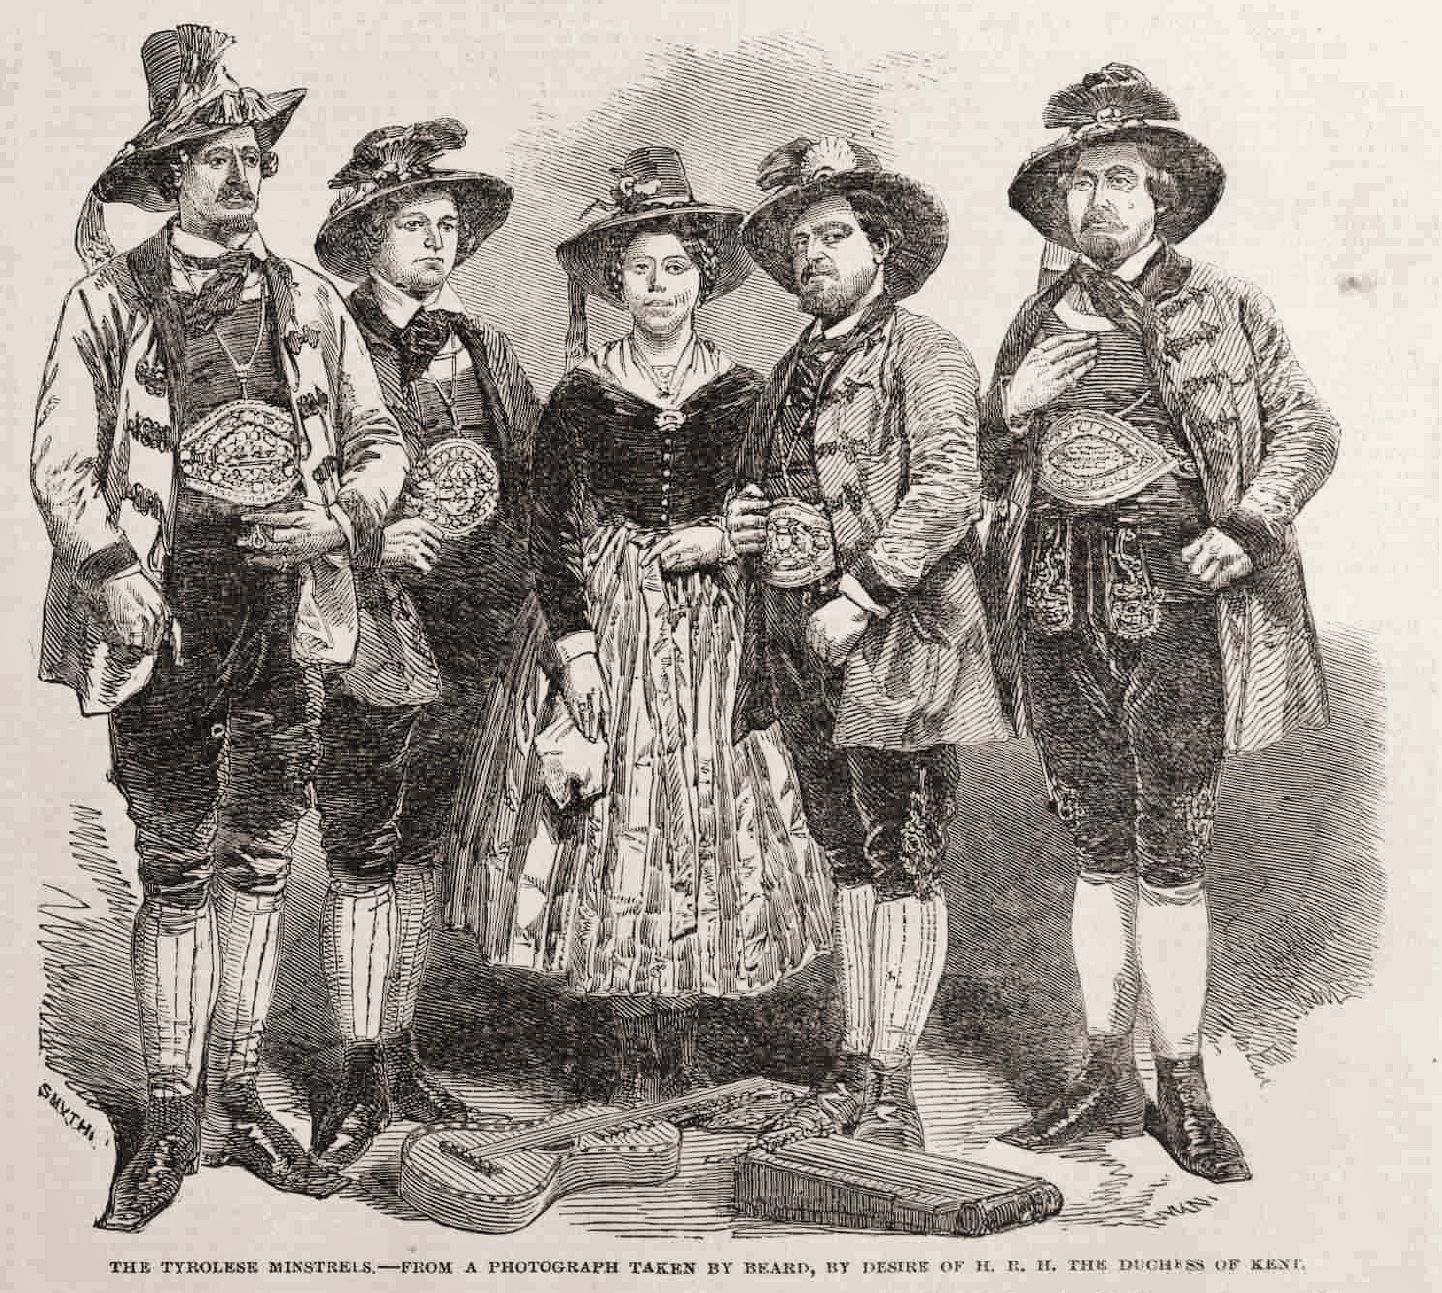 Veit Rahm, zither, and Tyrolese Minstrels, London, 1851